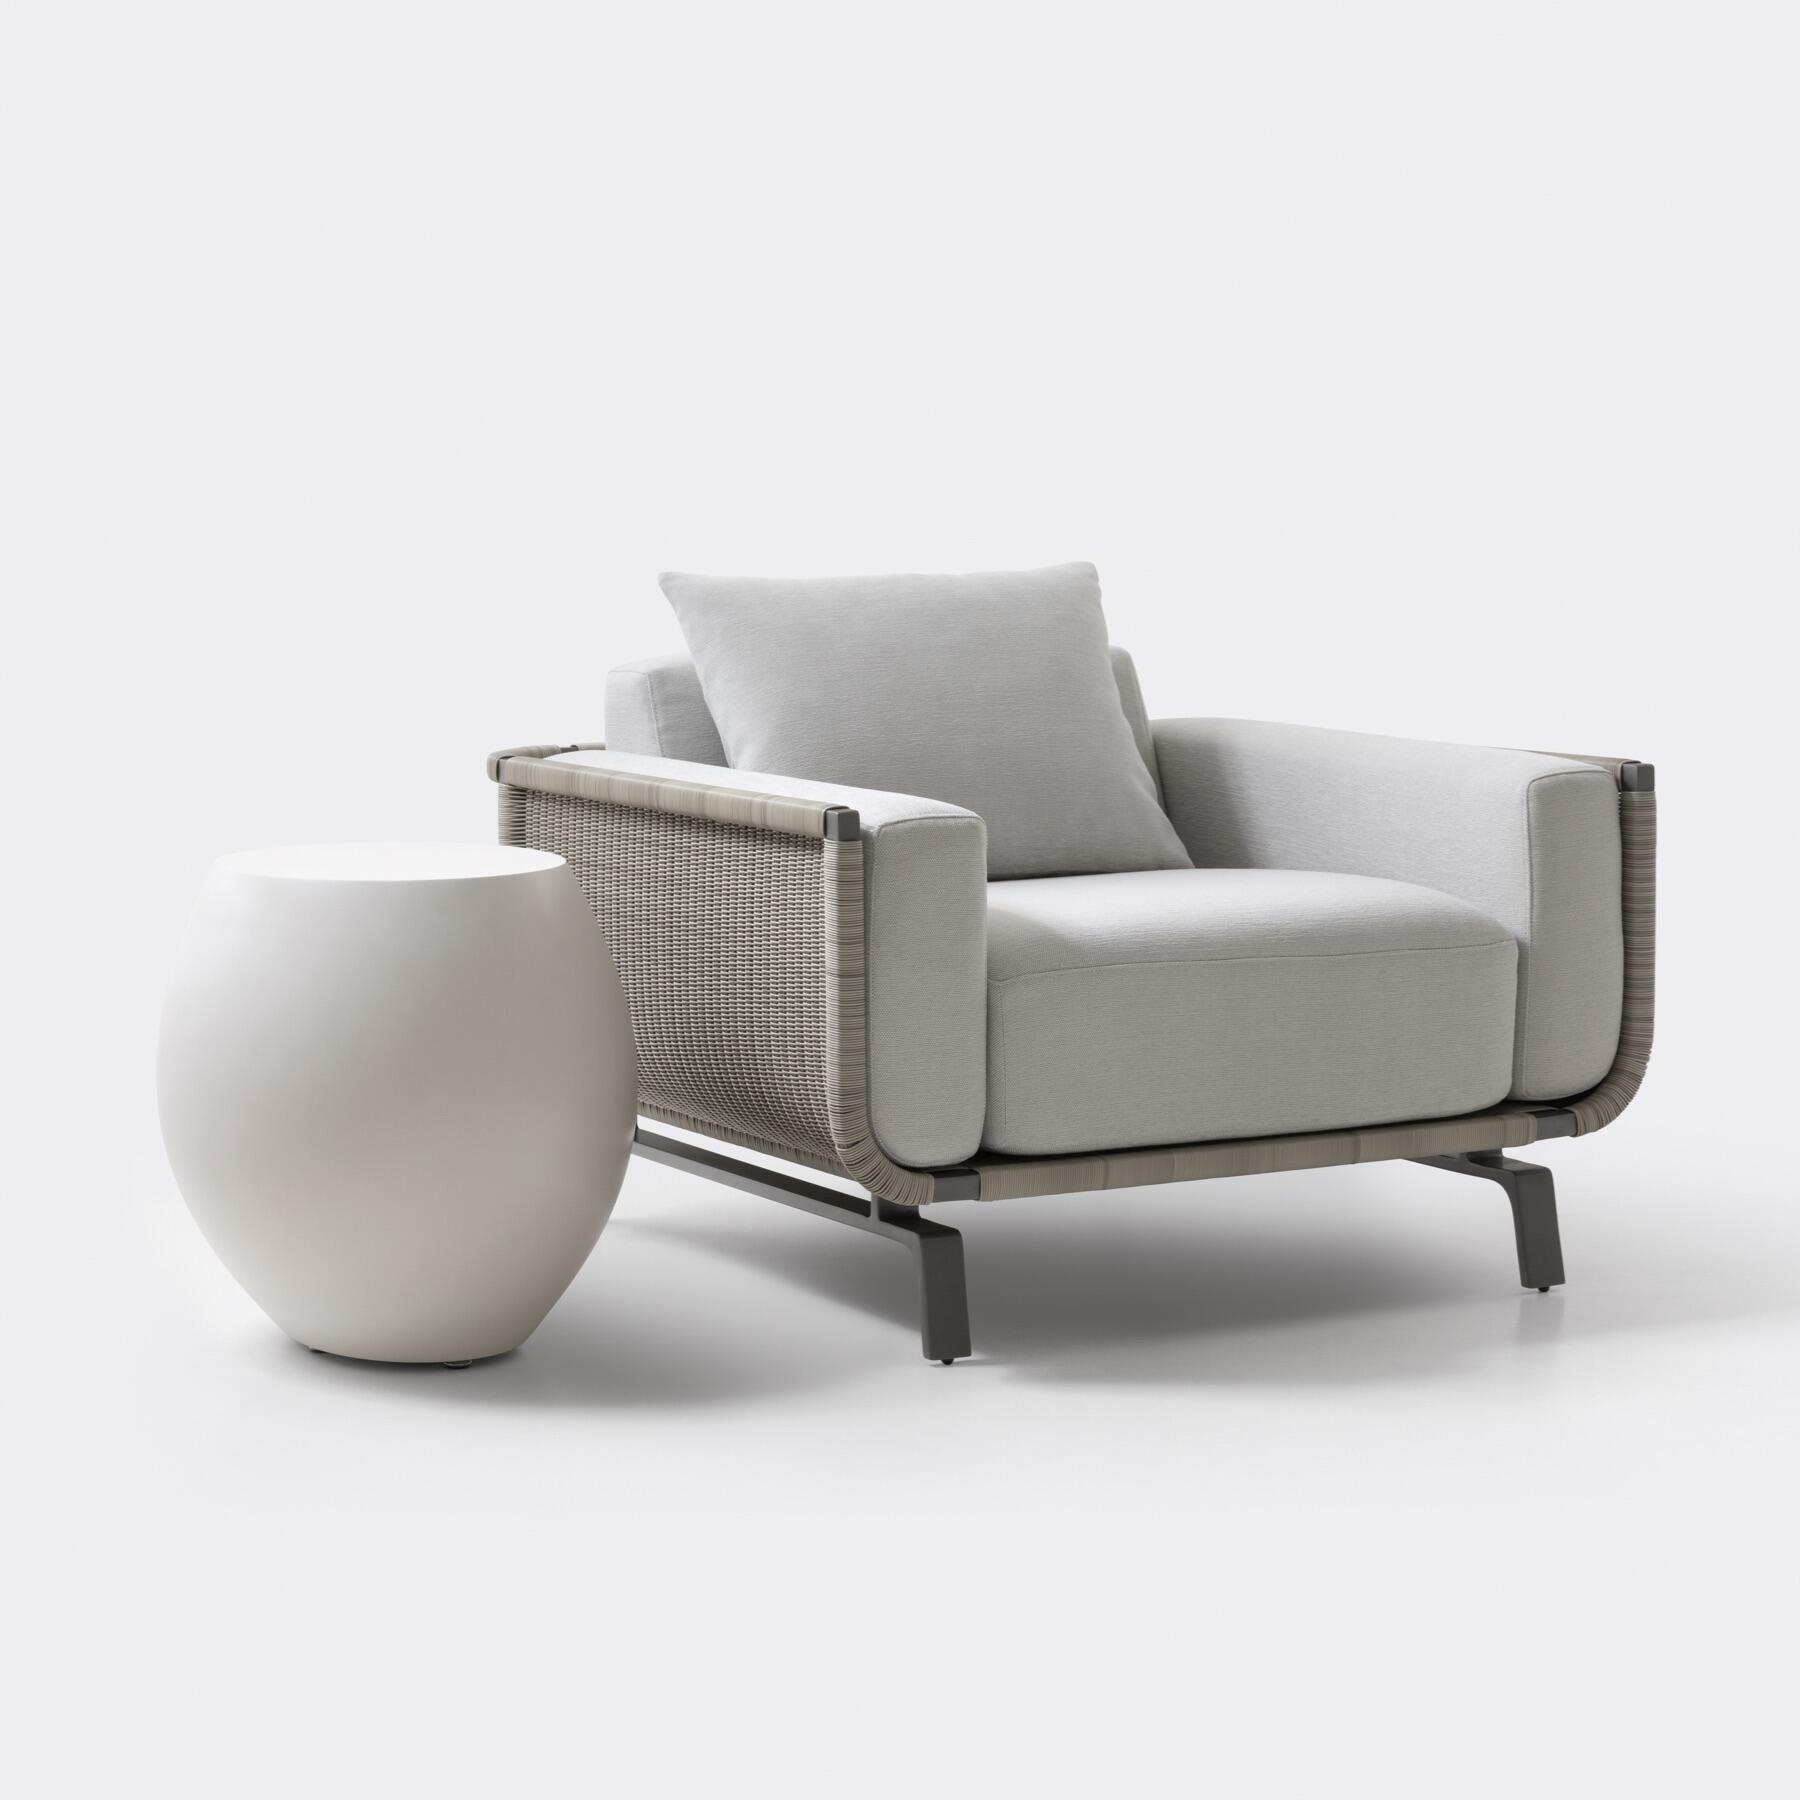 Plateau Side Table, Polar White, Shown with Tortuga Sectional